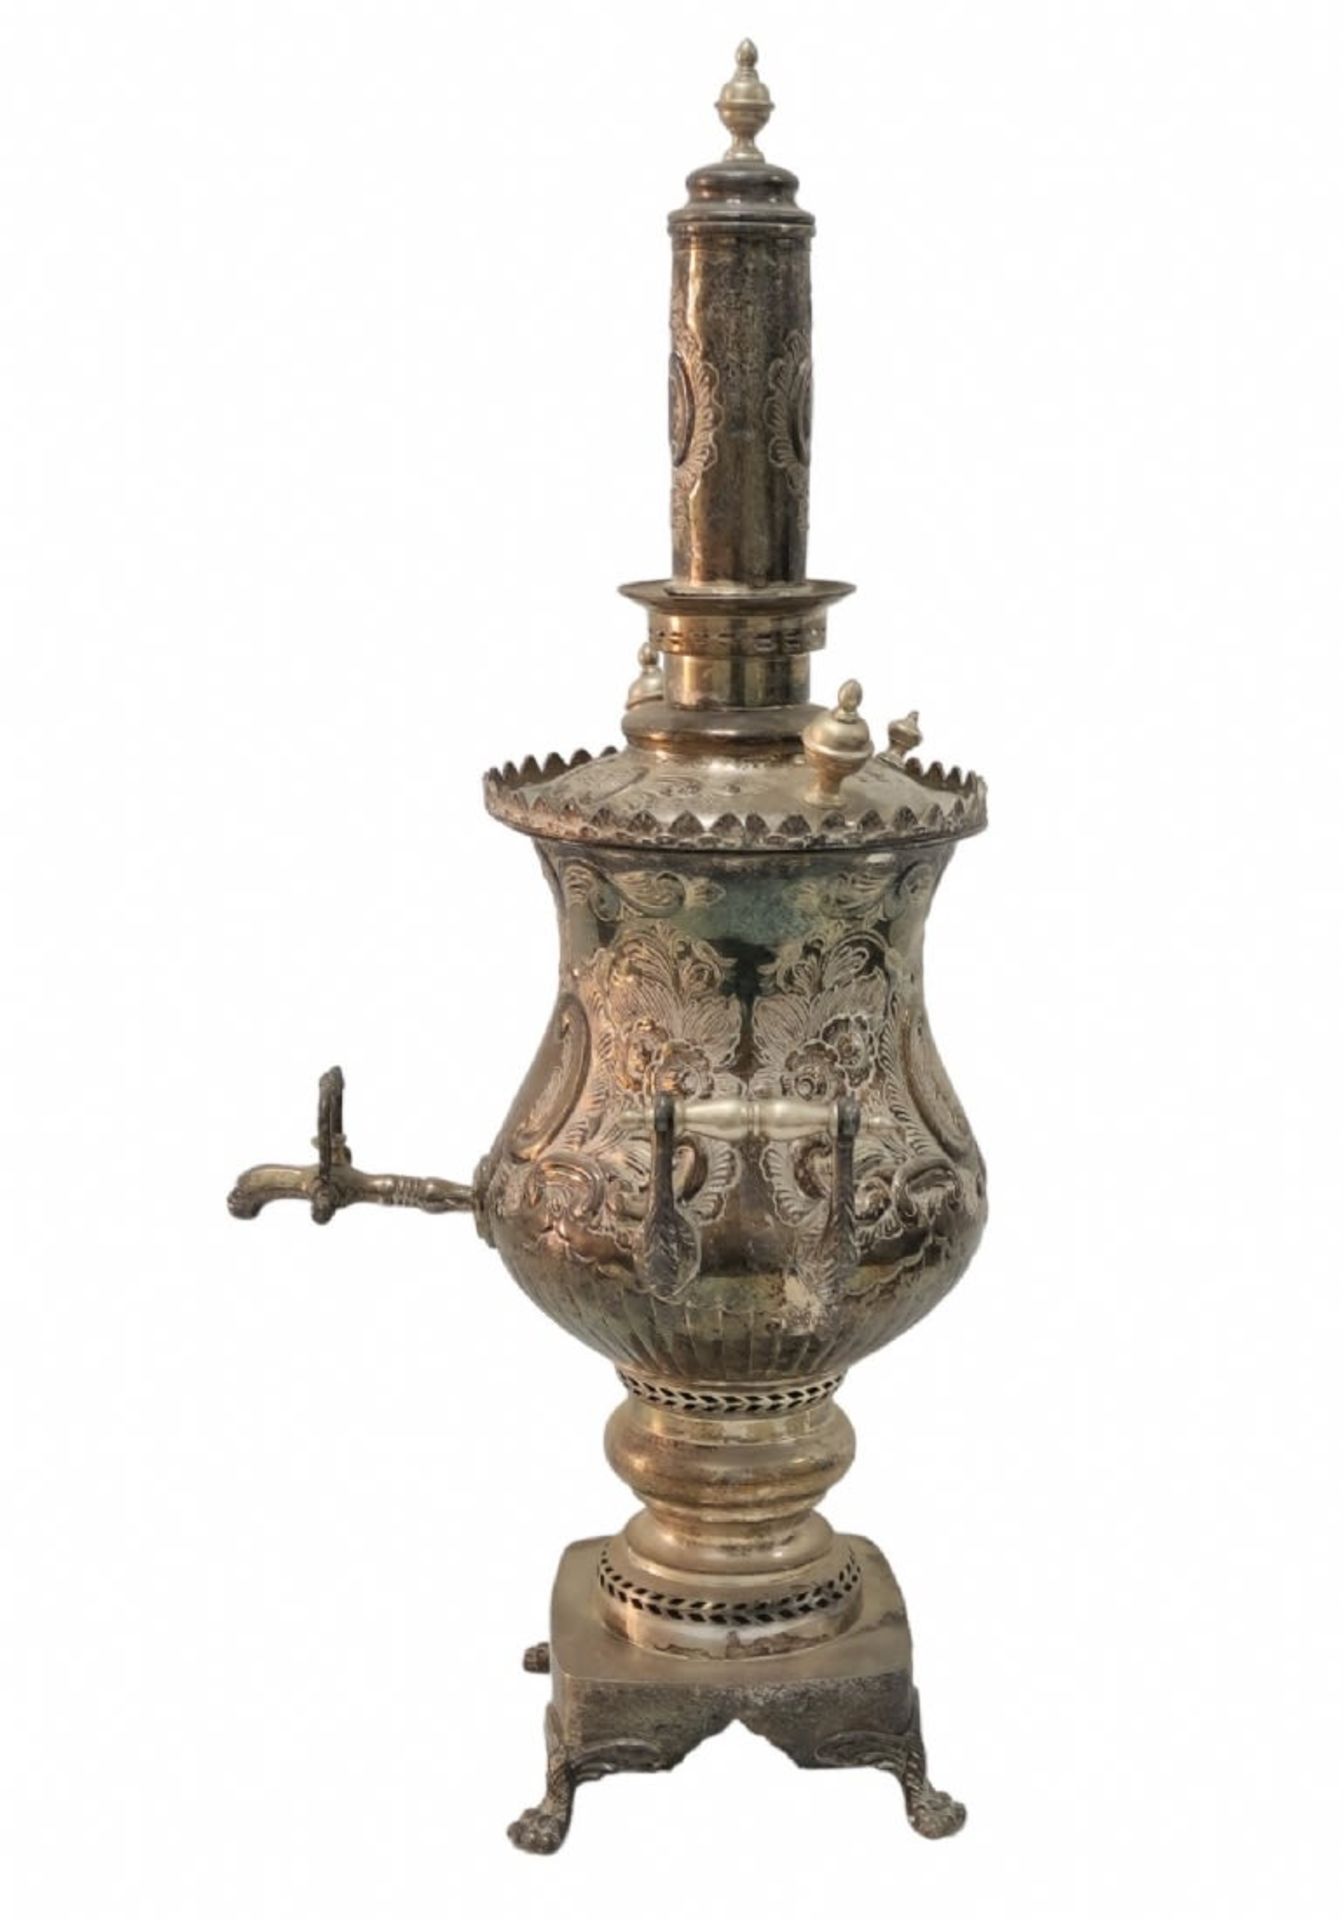 A large and impressive Moroccan samovar, silver plated metal in Repousse work, in the Neo-Rococo